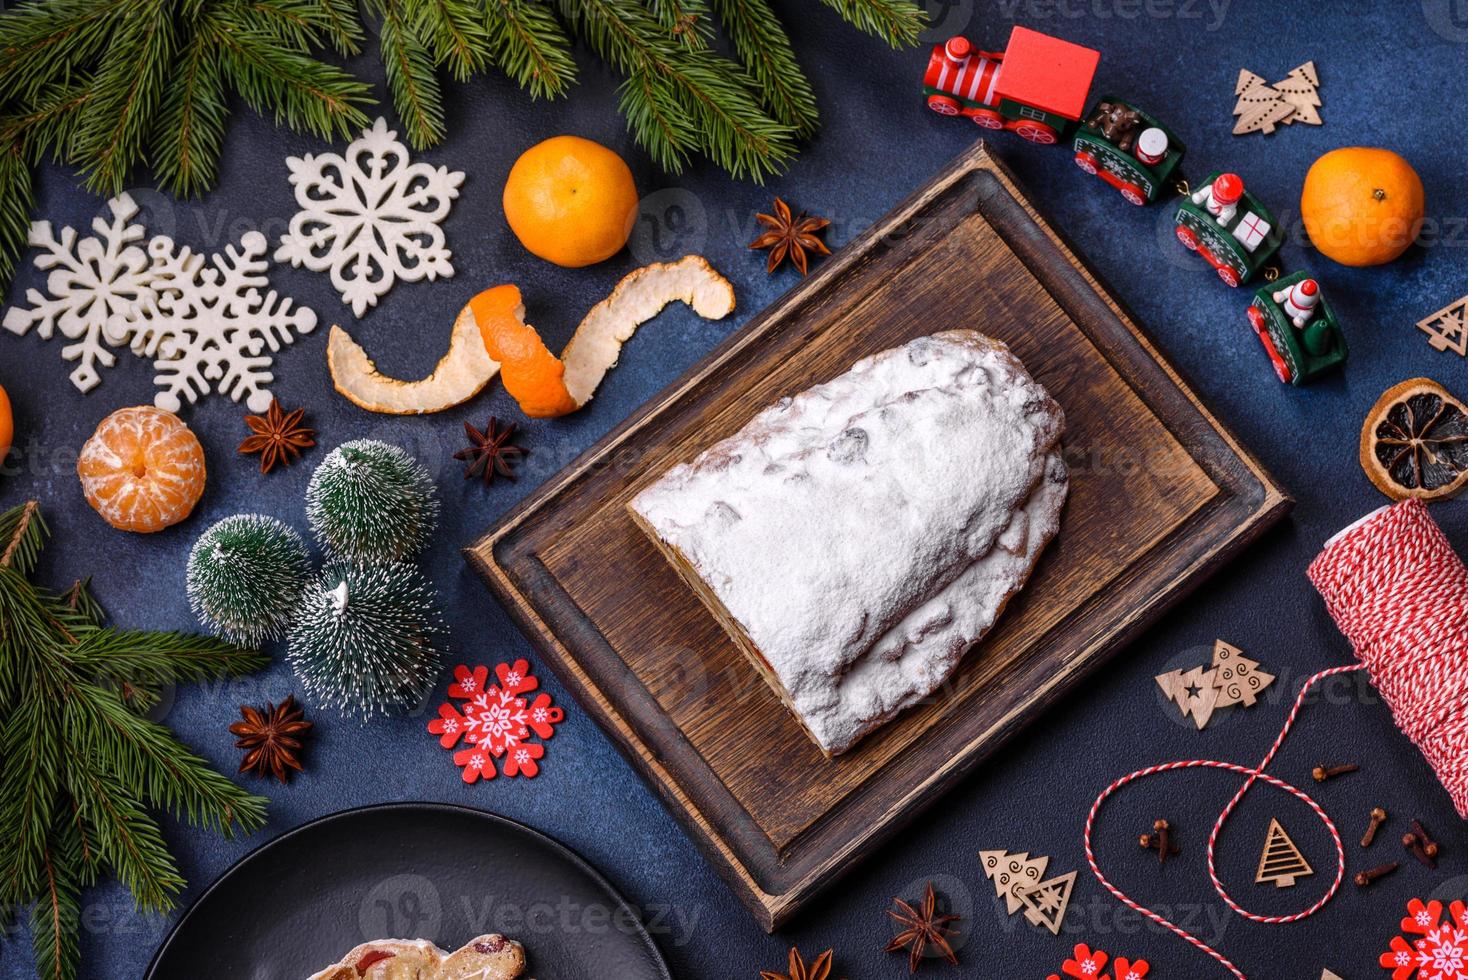 Delicious festive New Year's pie with candied fruits, marzipan and nuts on a dark concrete background photo